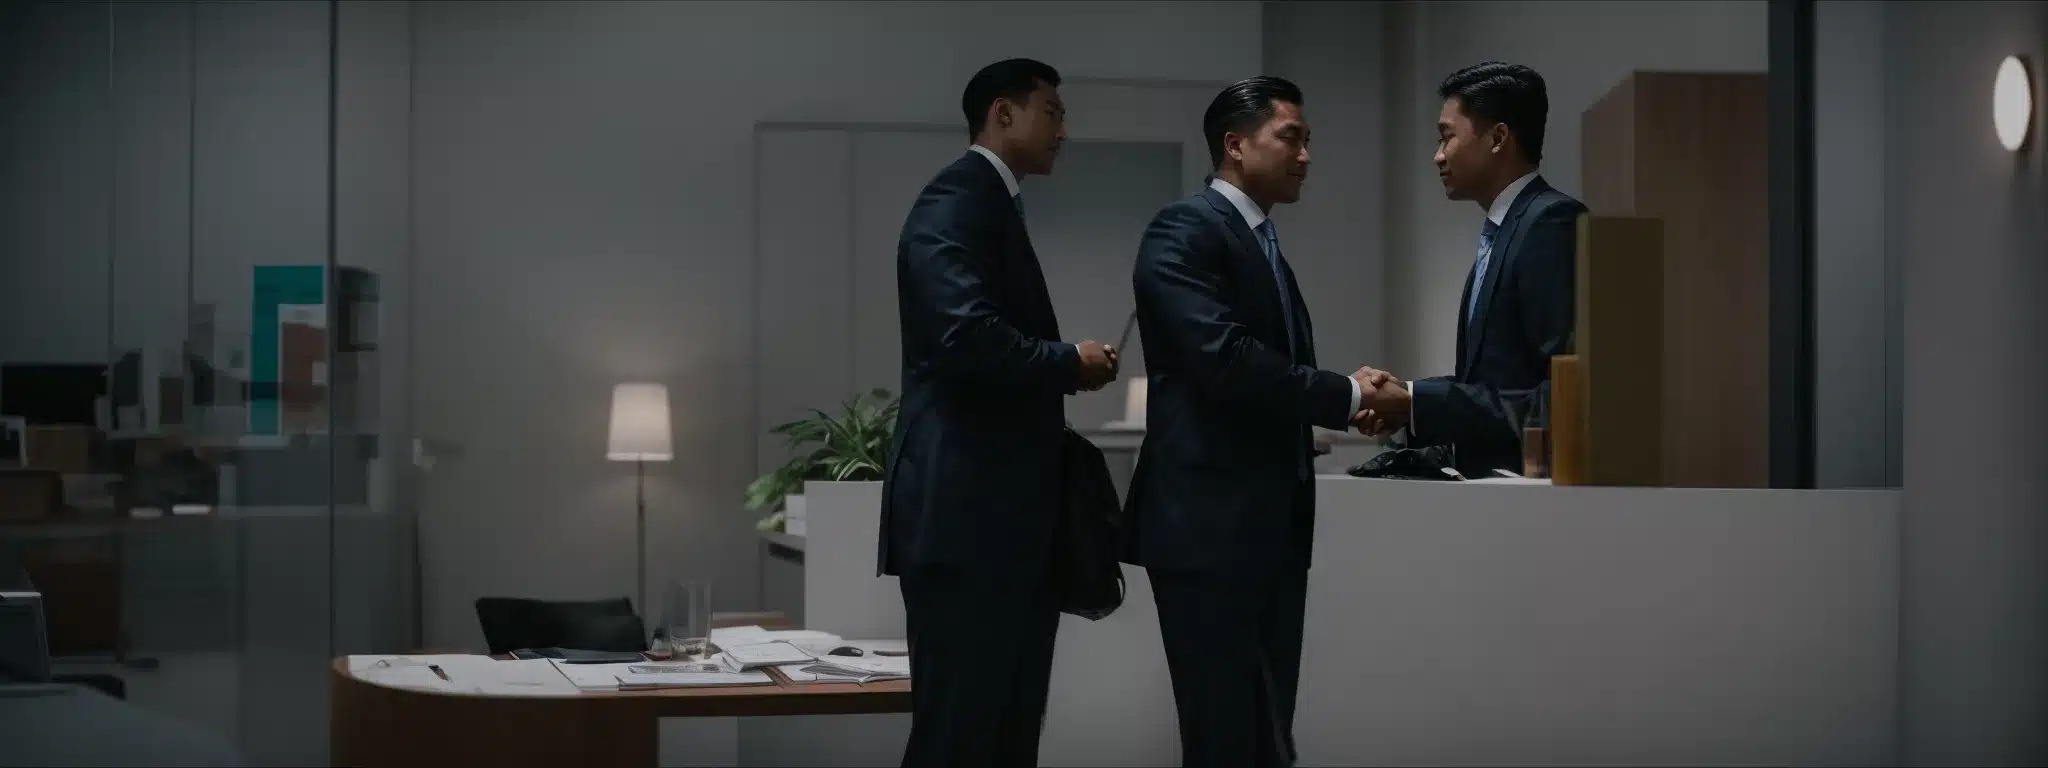 Two Businesspeople Shaking Hands, Symbolizing A Unique Partnership Against A Backdrop Of Bustling Office Activity.